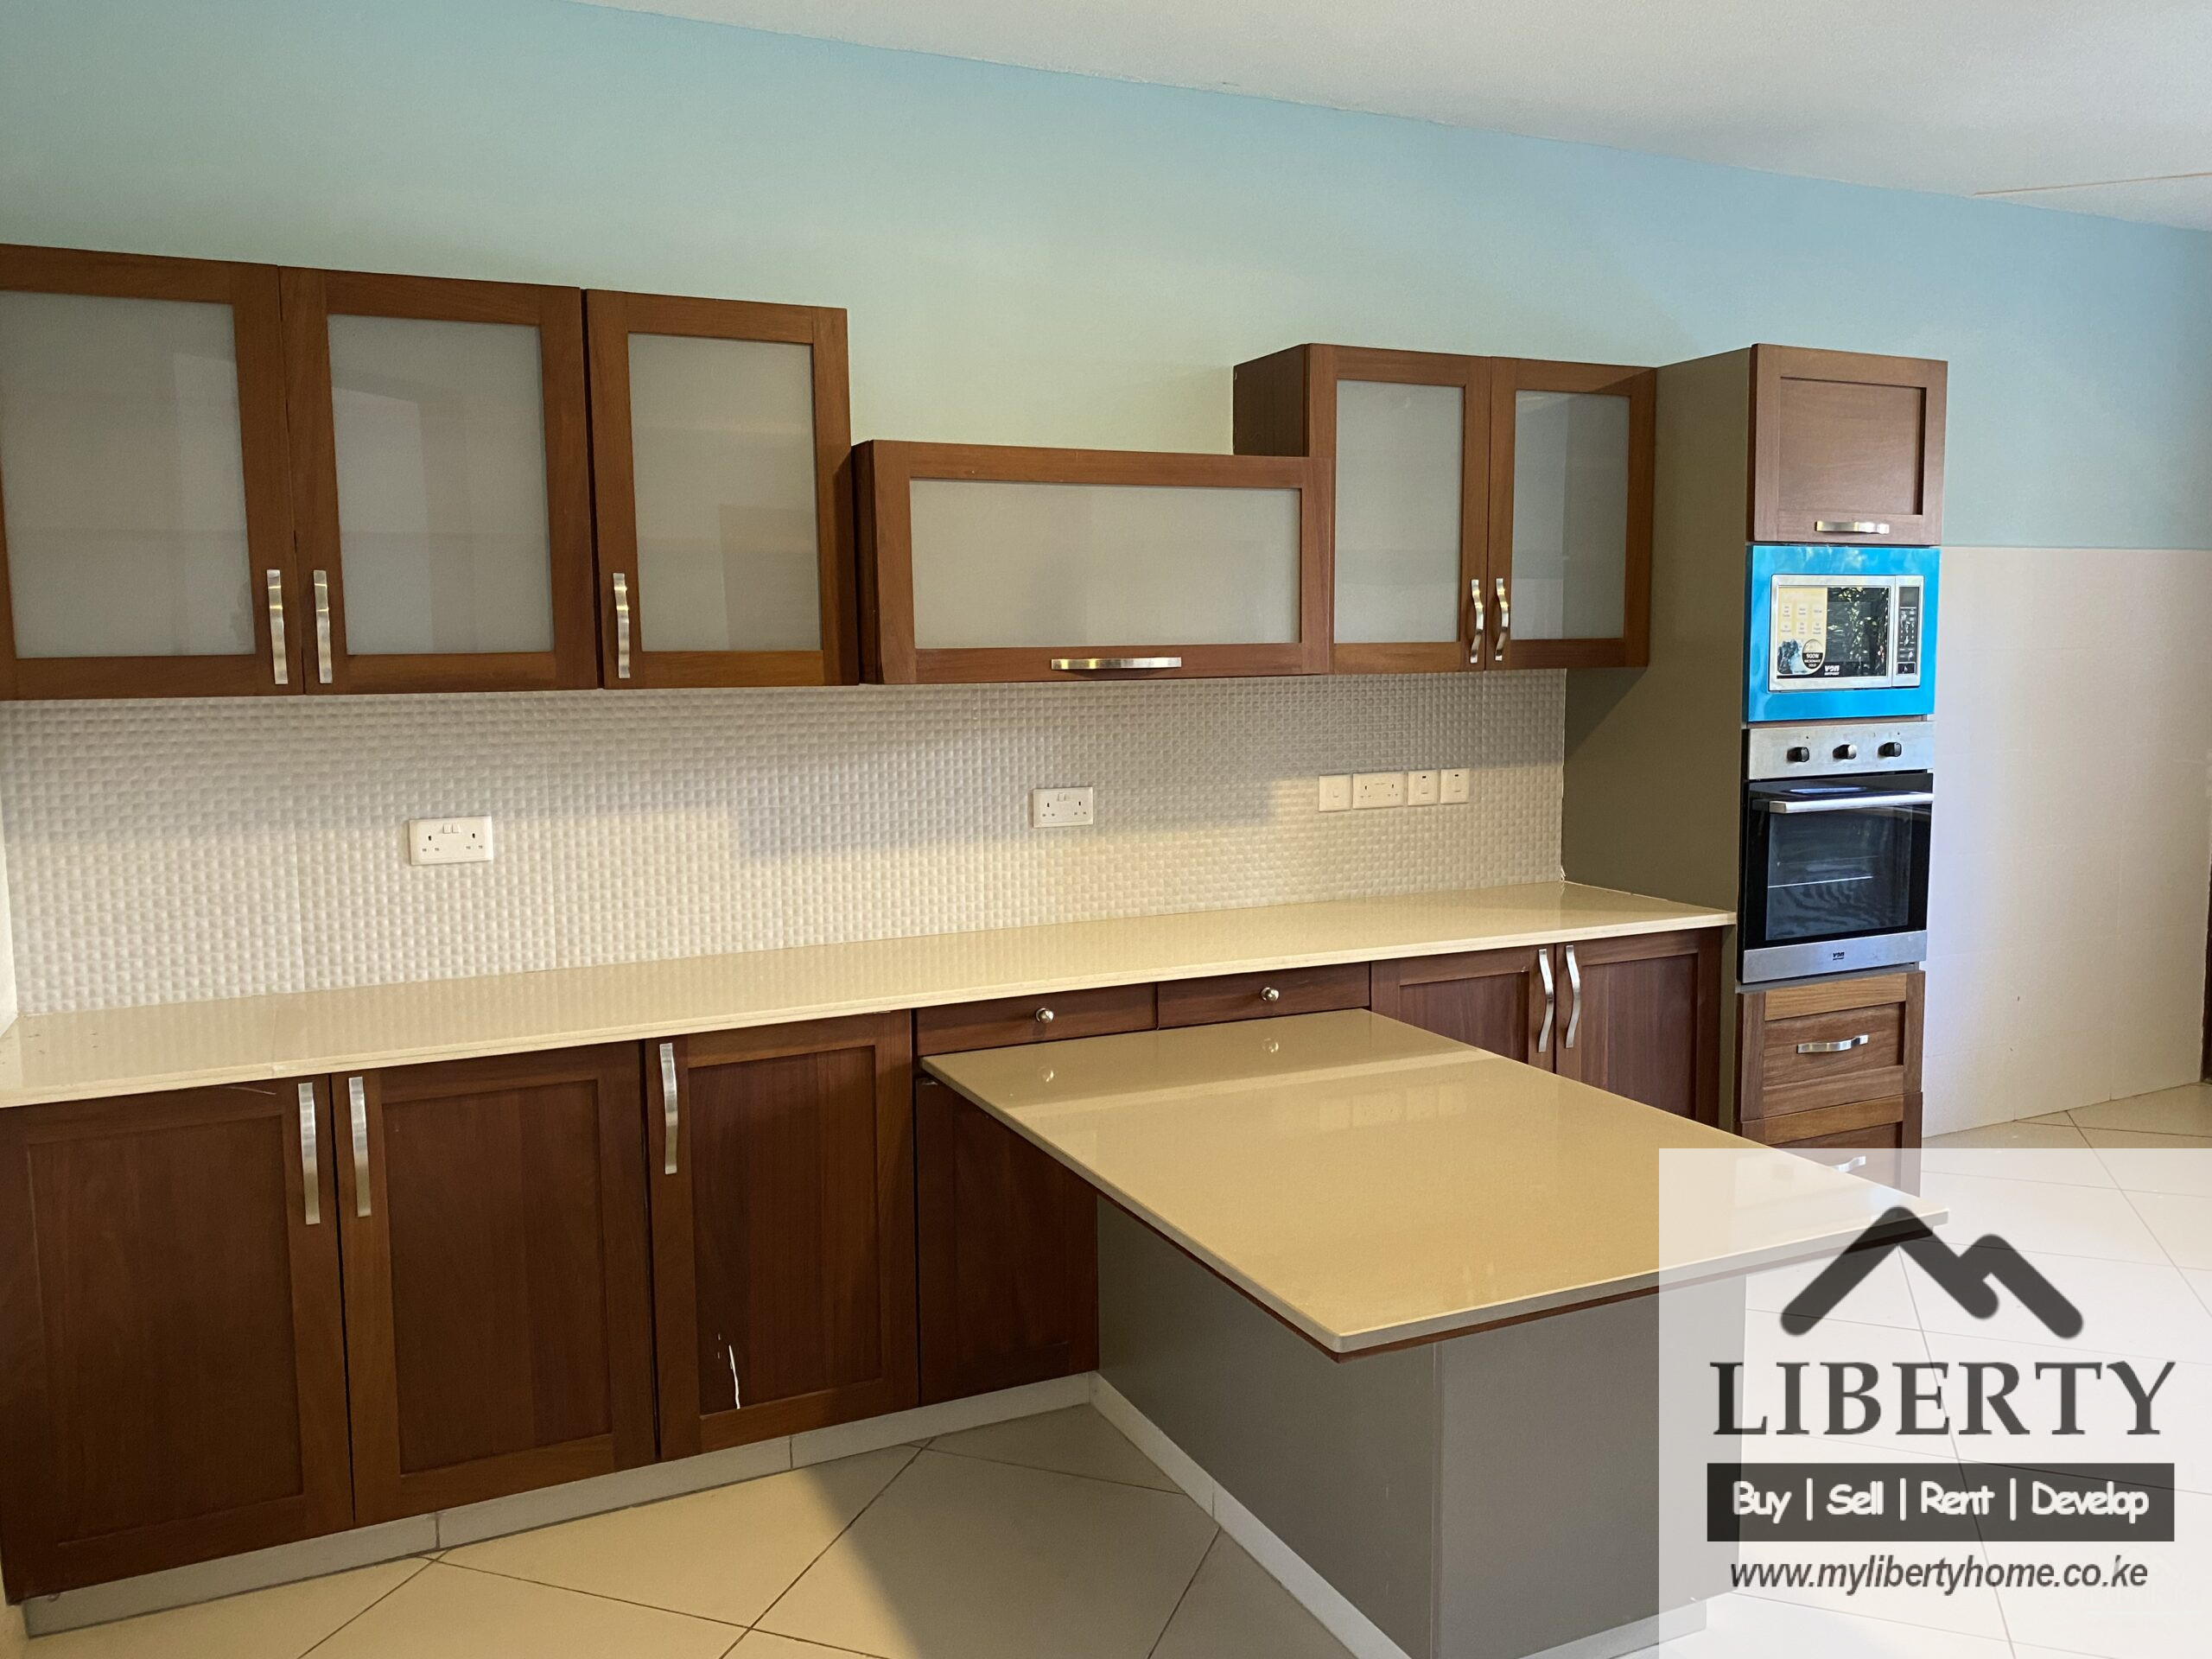 Newly Renovated Modern 4 Bedroom Apartment In Mombasa-Nyali For Rent-110K- Ref-769